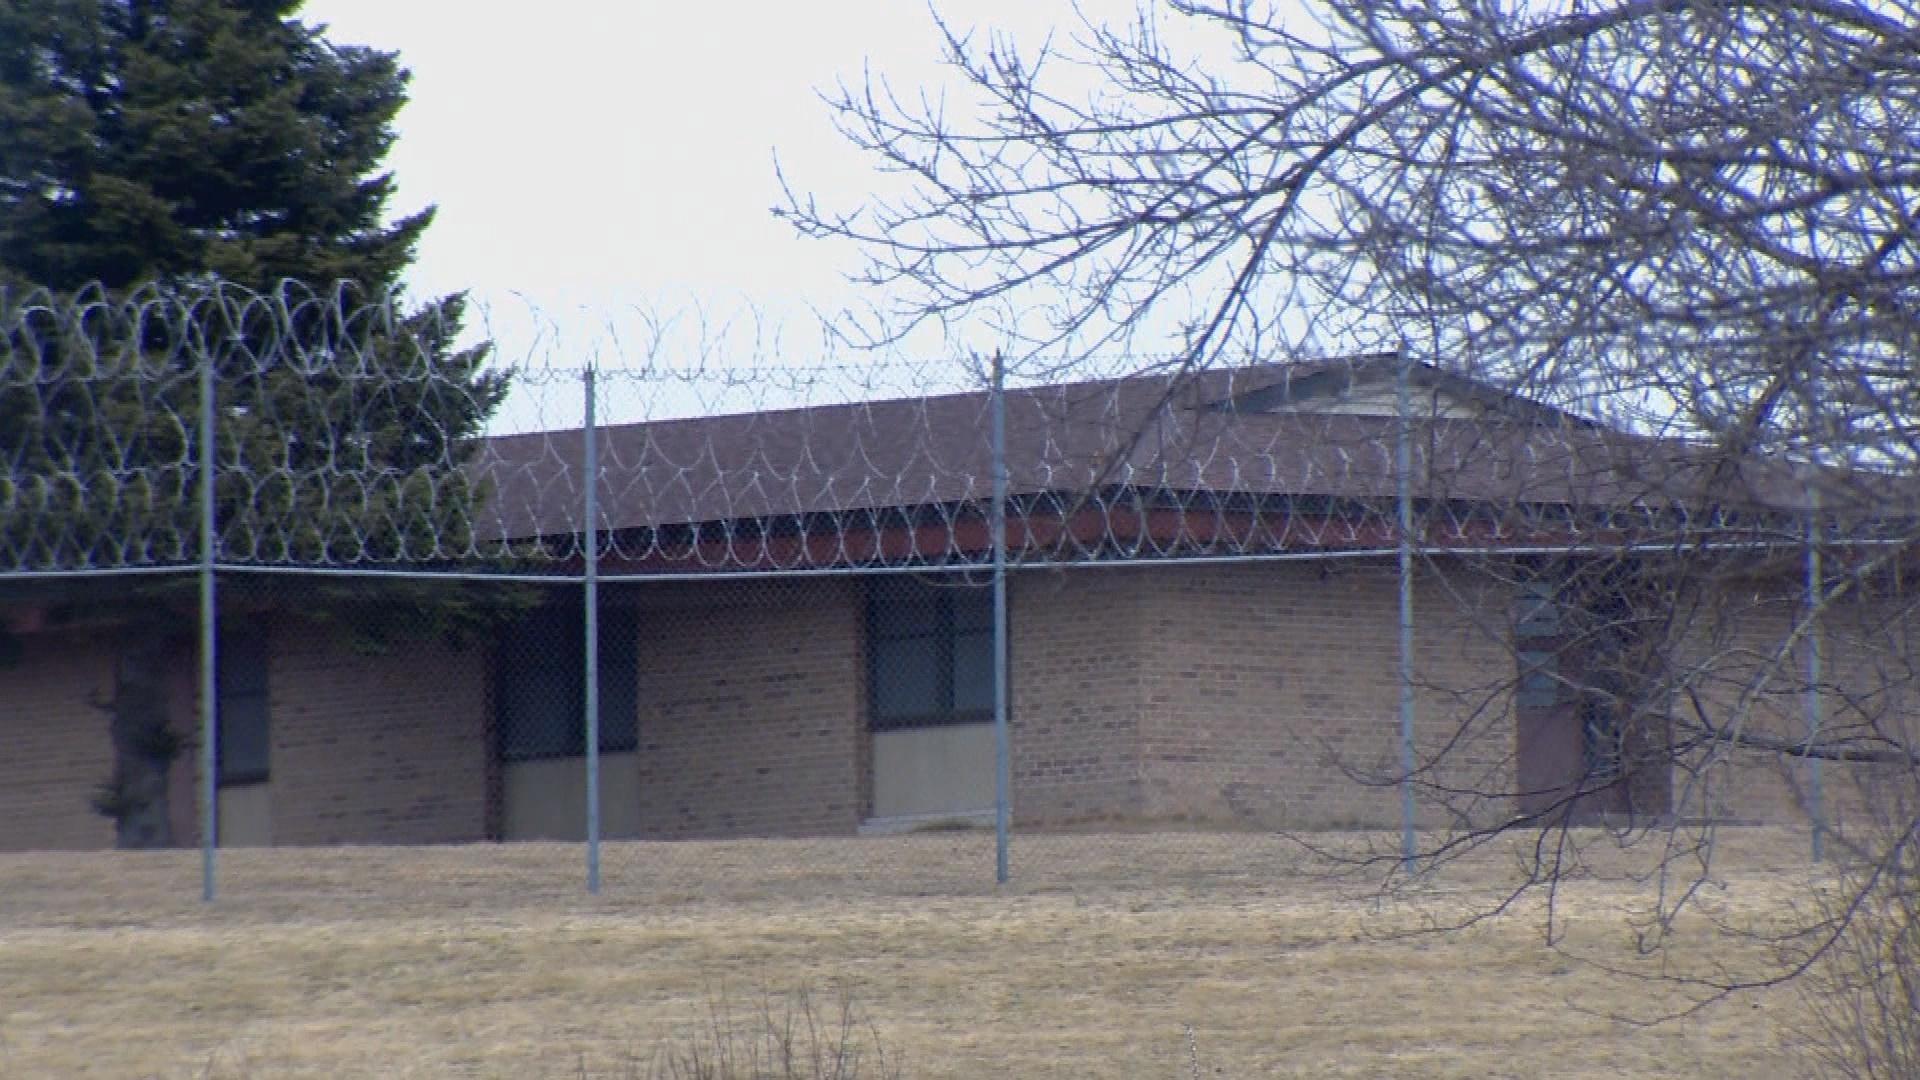 State Budgeting Committee Declines Plans for Youth Prisons